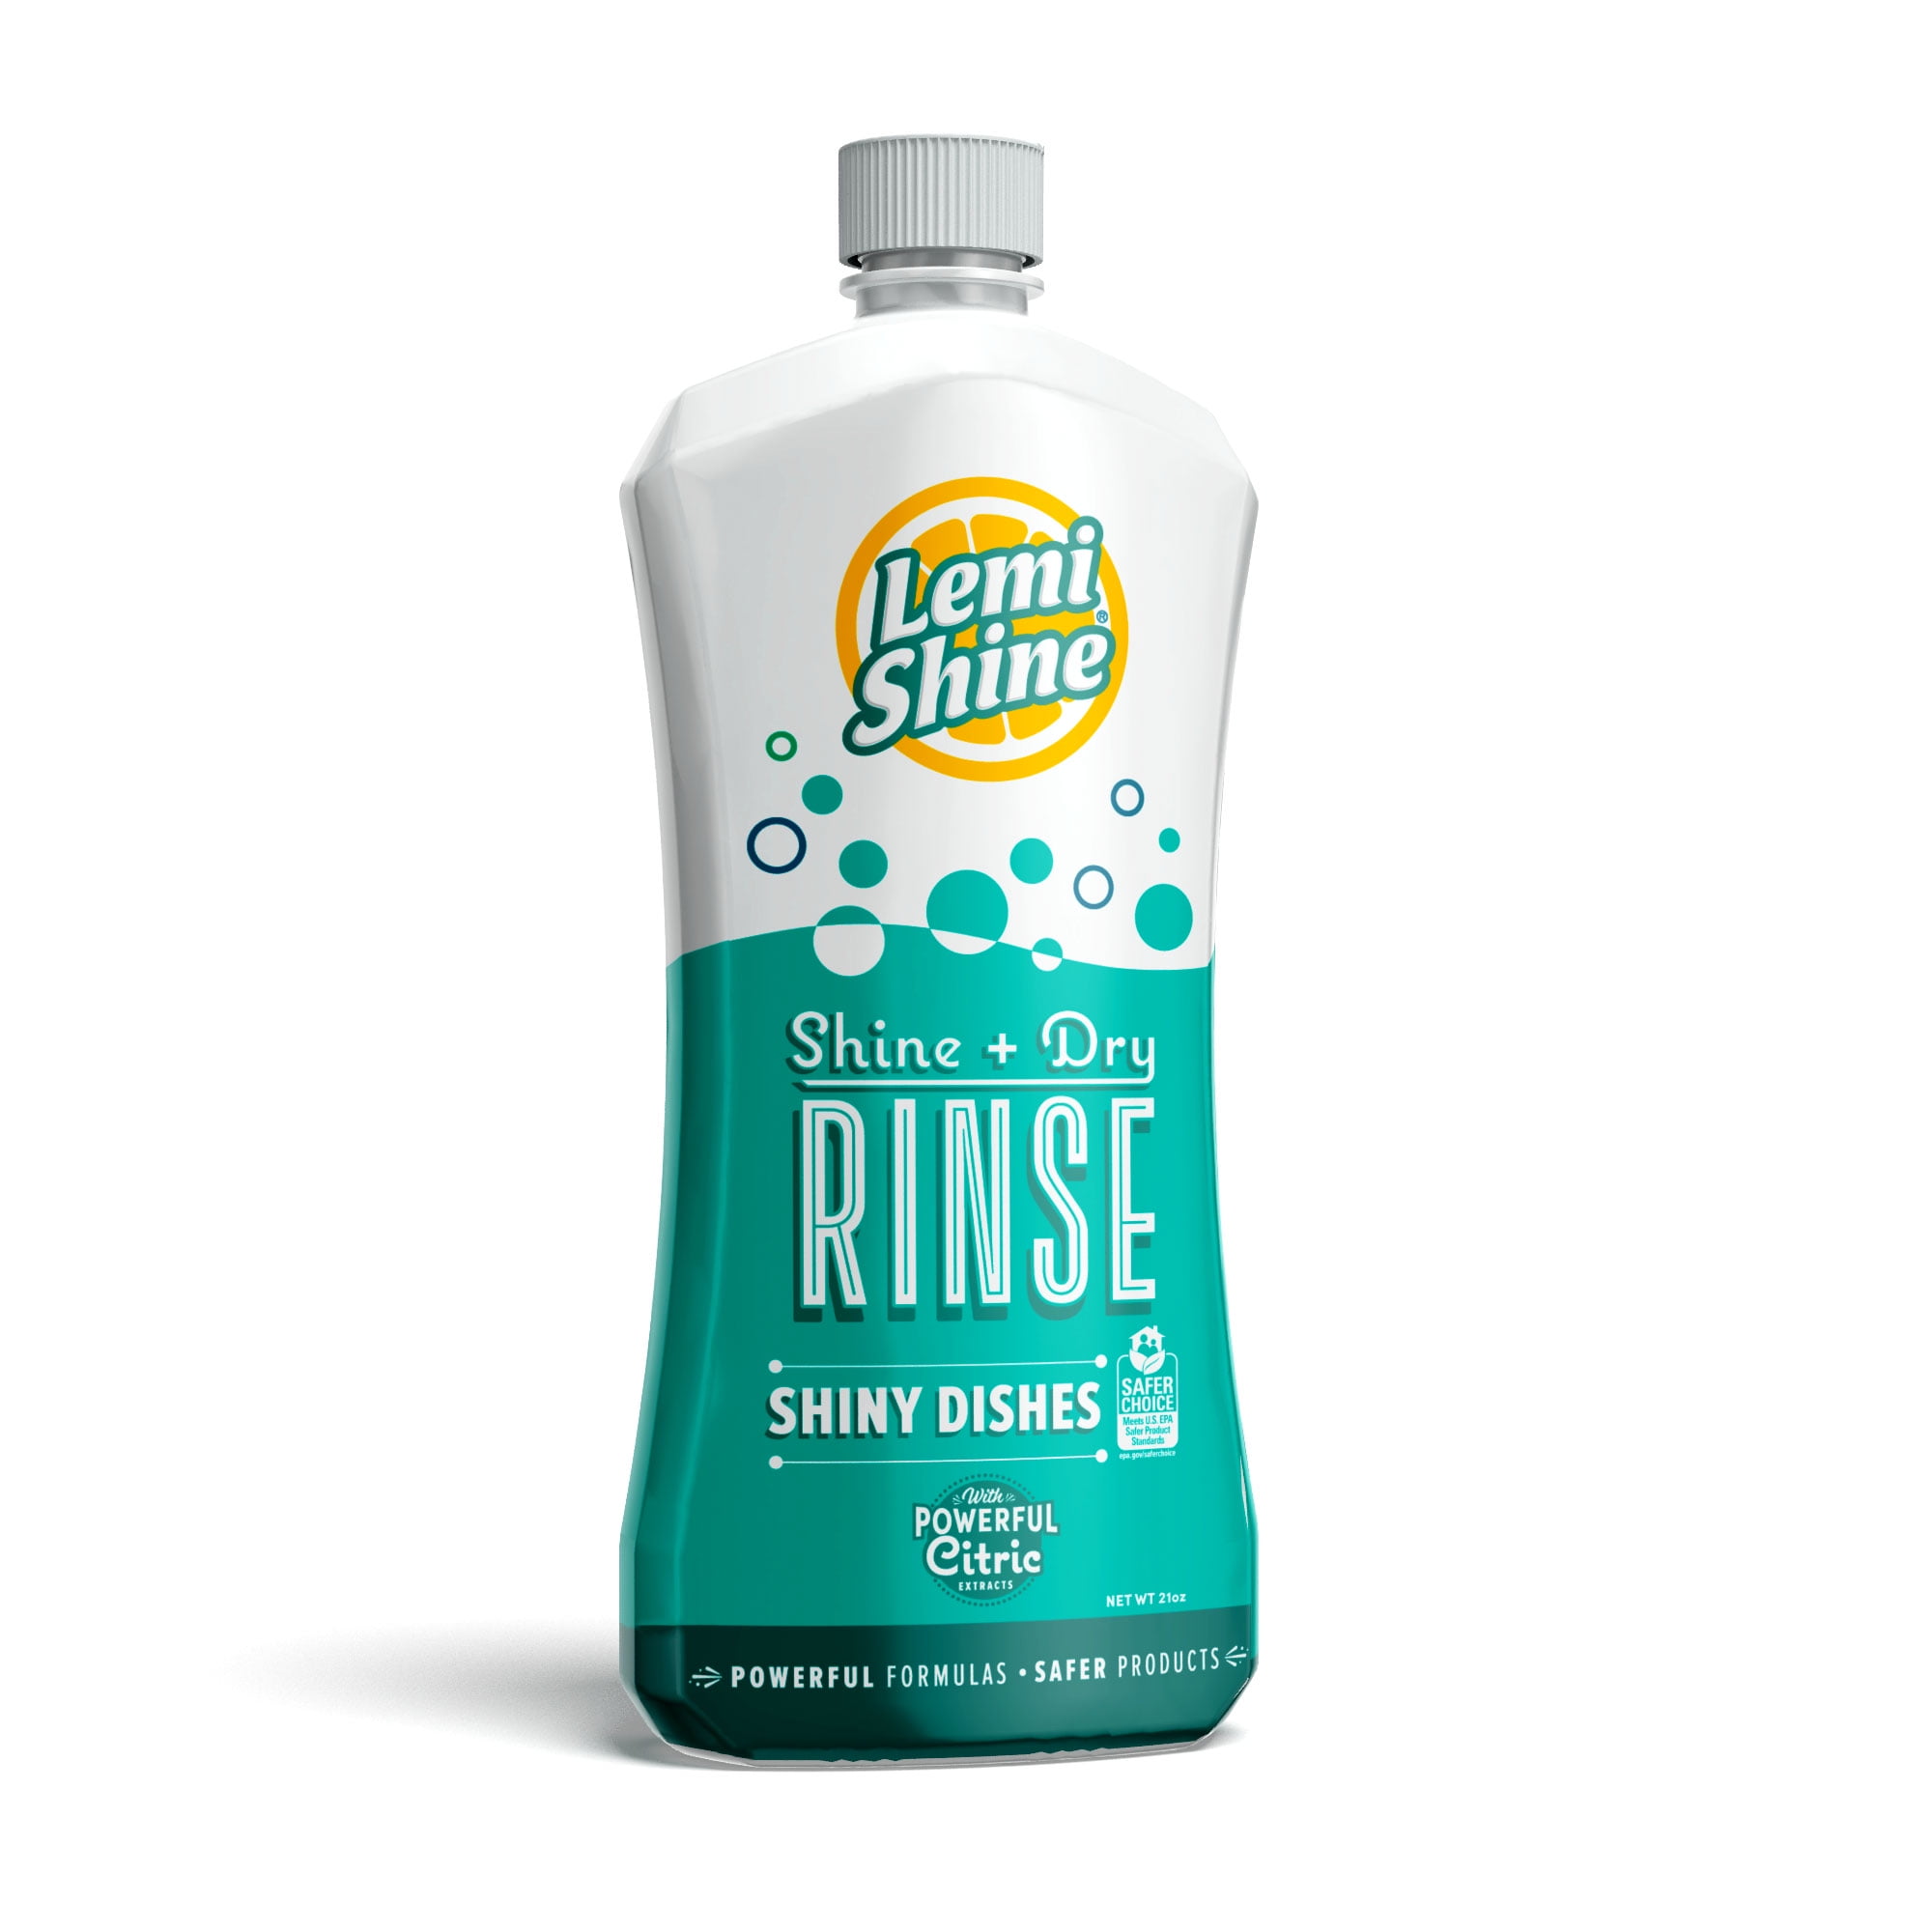 Finish Jet-Dry Ultra Rinse Aid Dishwasher Rinse Agent & Drying Agent (32  Ounce)